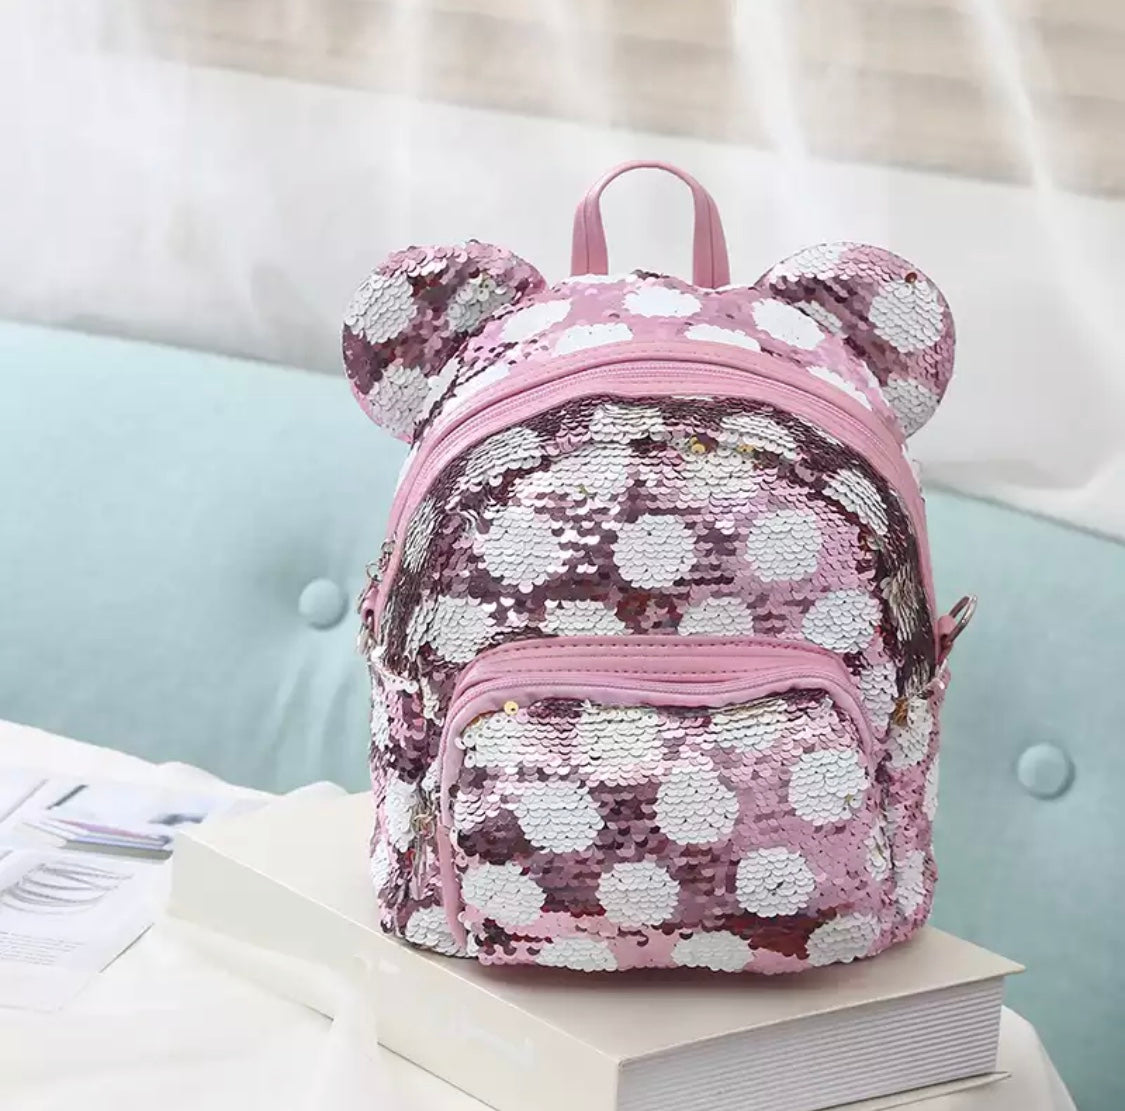 DDLGVERSE Mini Sequin Mouse Backpack Pink with White Spots